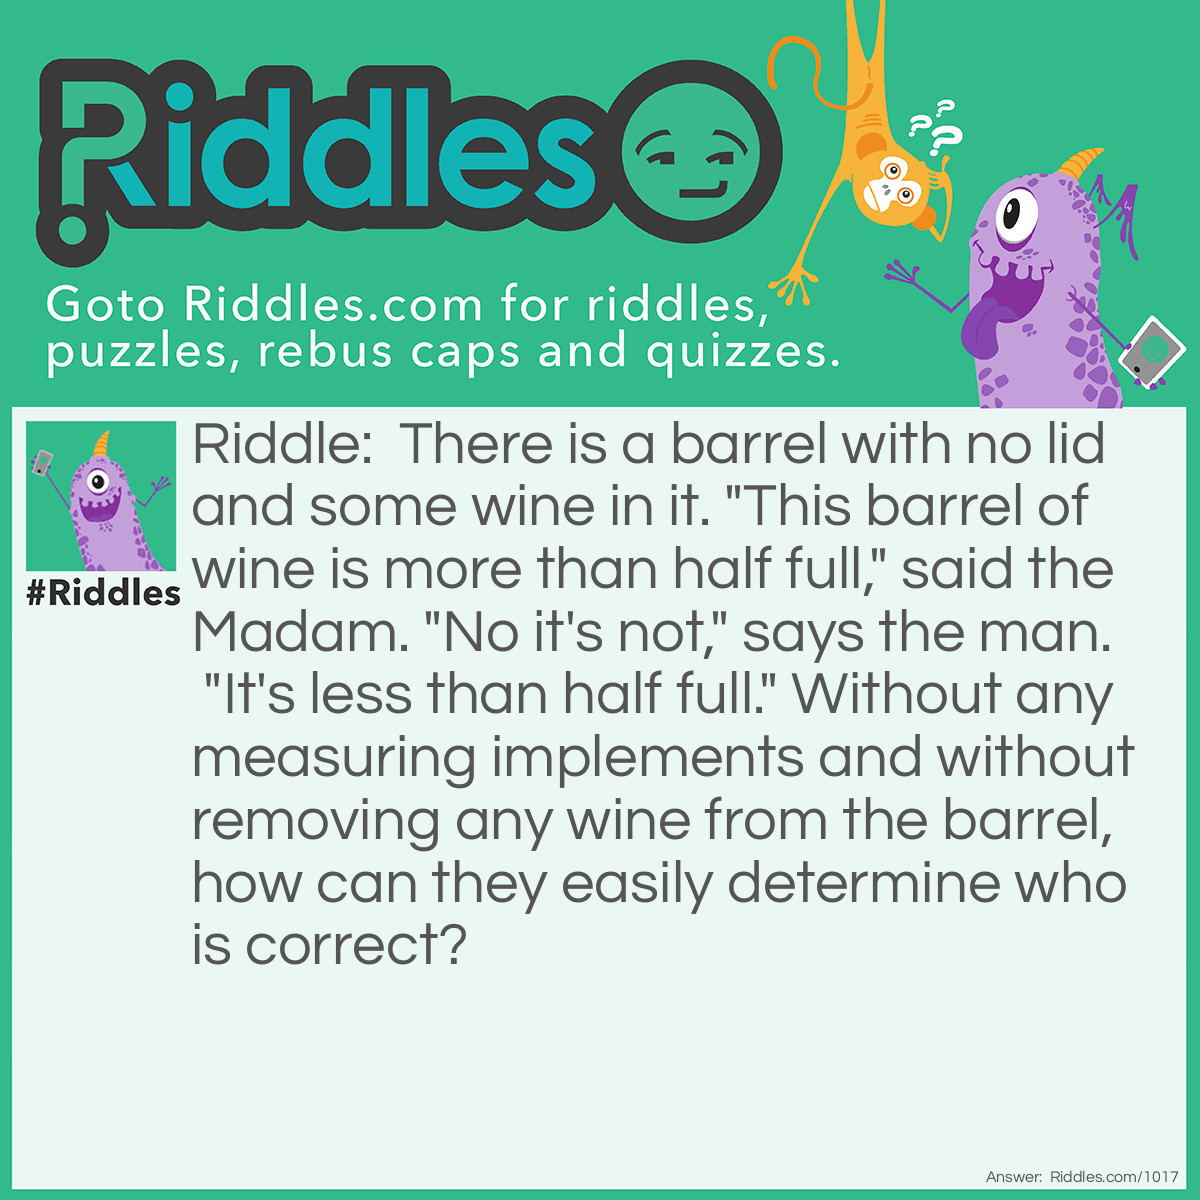 Riddle: There is a barrel with no lid and some wine in it. "This barrel of wine is more than half full," said the Madam. "No it's not," says the man. "It's less than half full." Without any measuring implements and without removing any wine from the barrel, how can they easily determine who is correct? Answer: Tilt the barrel until the wine barely touches the lip of the barrel. If the bottom of the barrel is visible then it is less than half full. If the barrel bottom is still completely coverd by the wine, then it is more than half full.